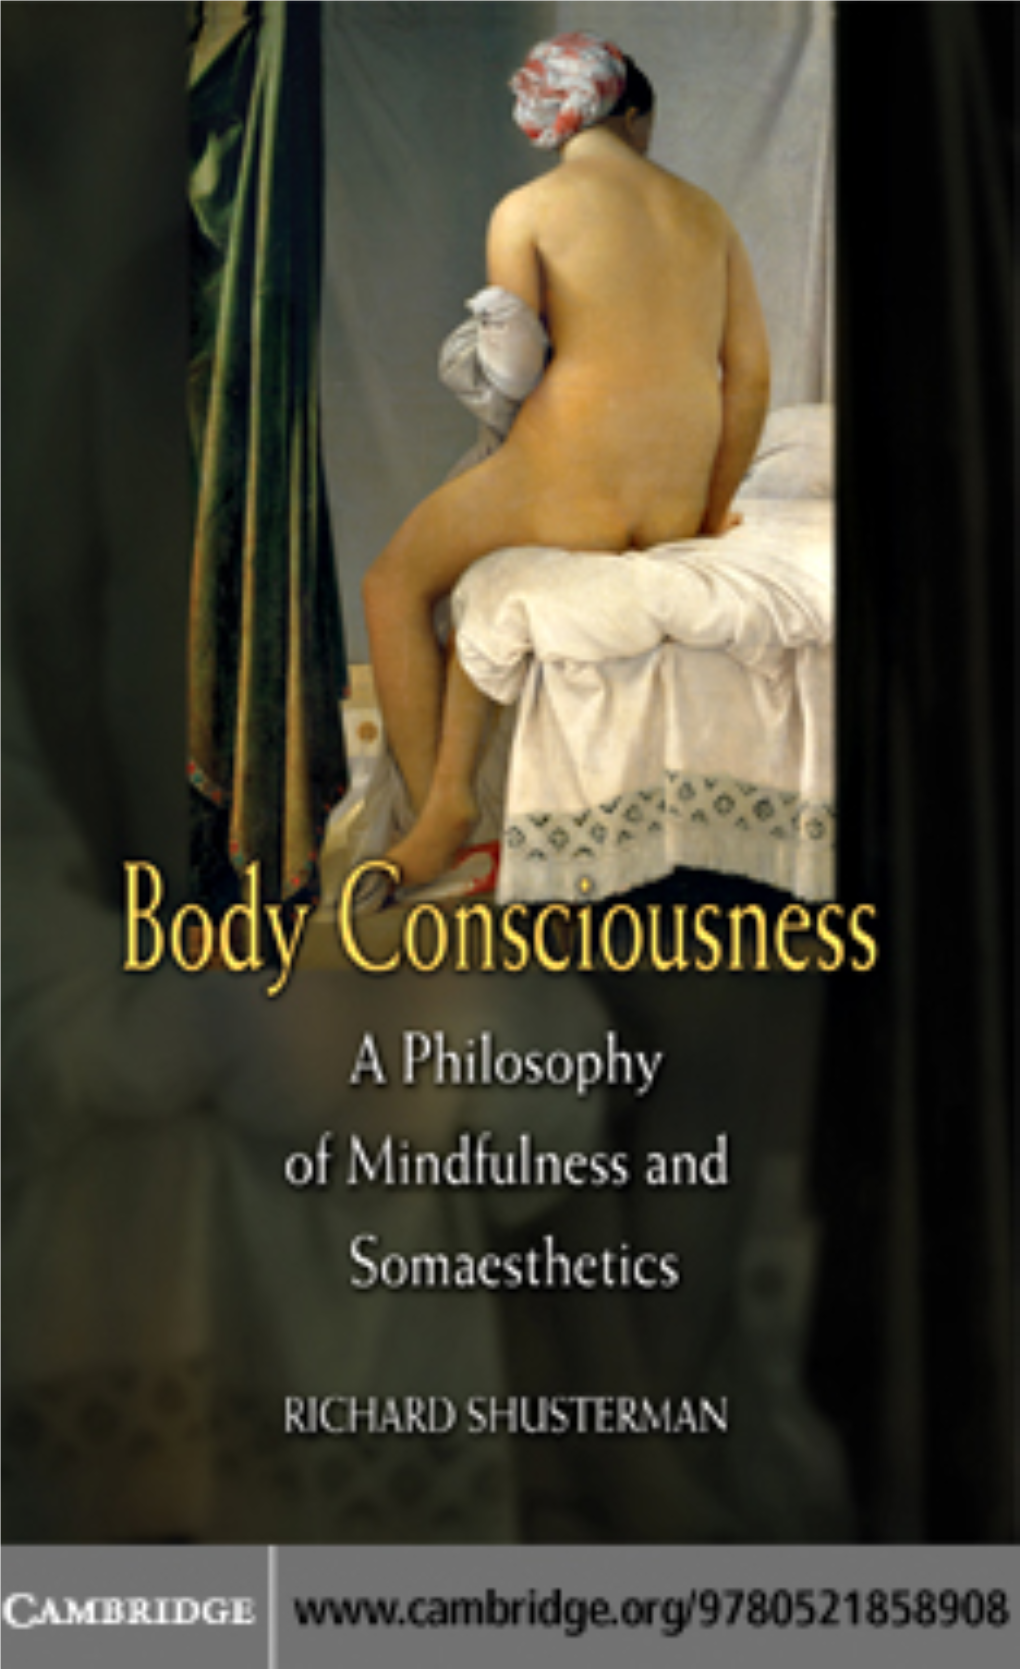 Body Consciousness: a Philosophy of Mindfulness and Somaesthetics